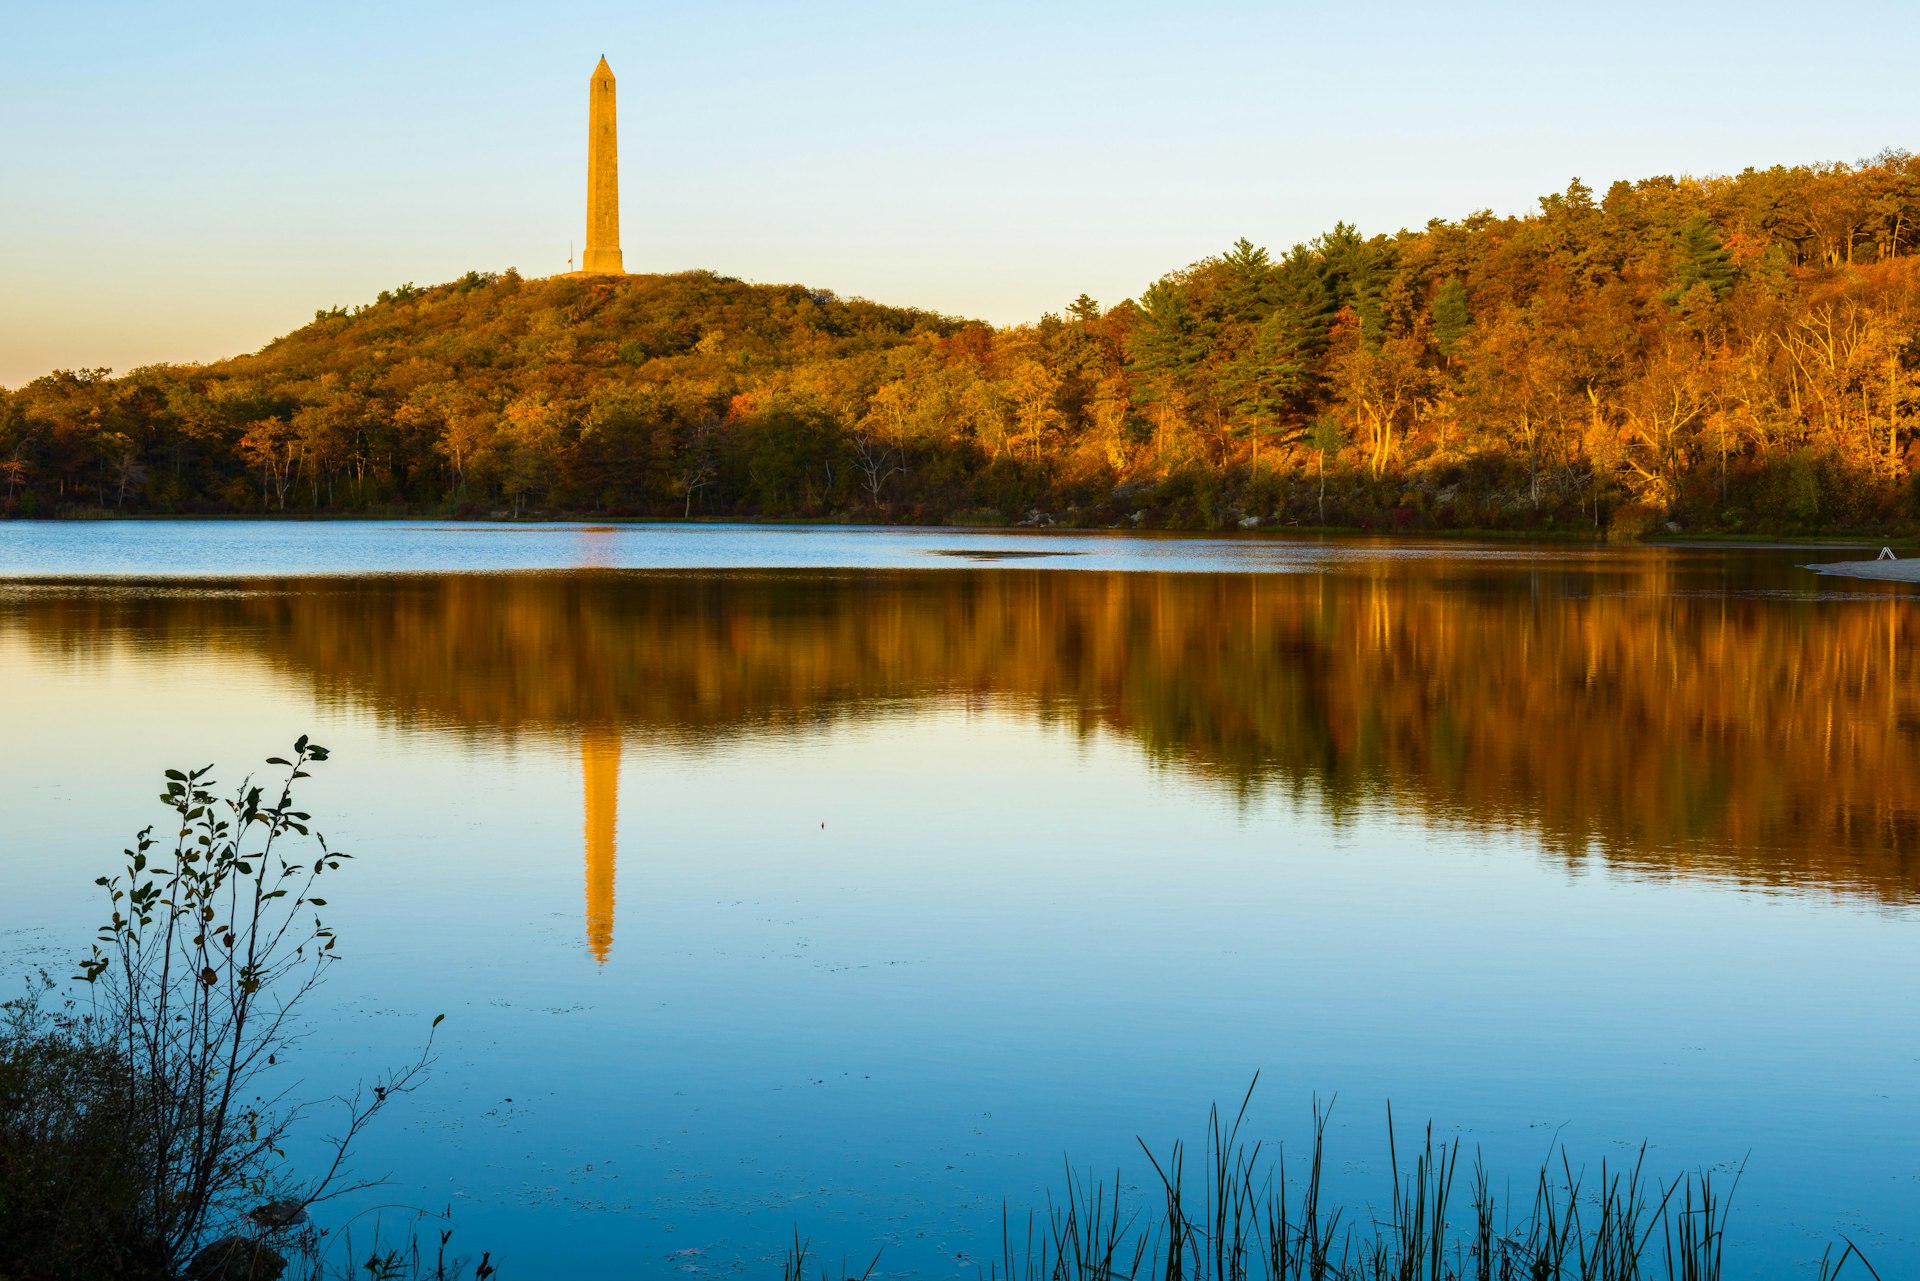 A 1930s war monument is reflected in the lake on a fall evening at High Point State Park in New Jersey